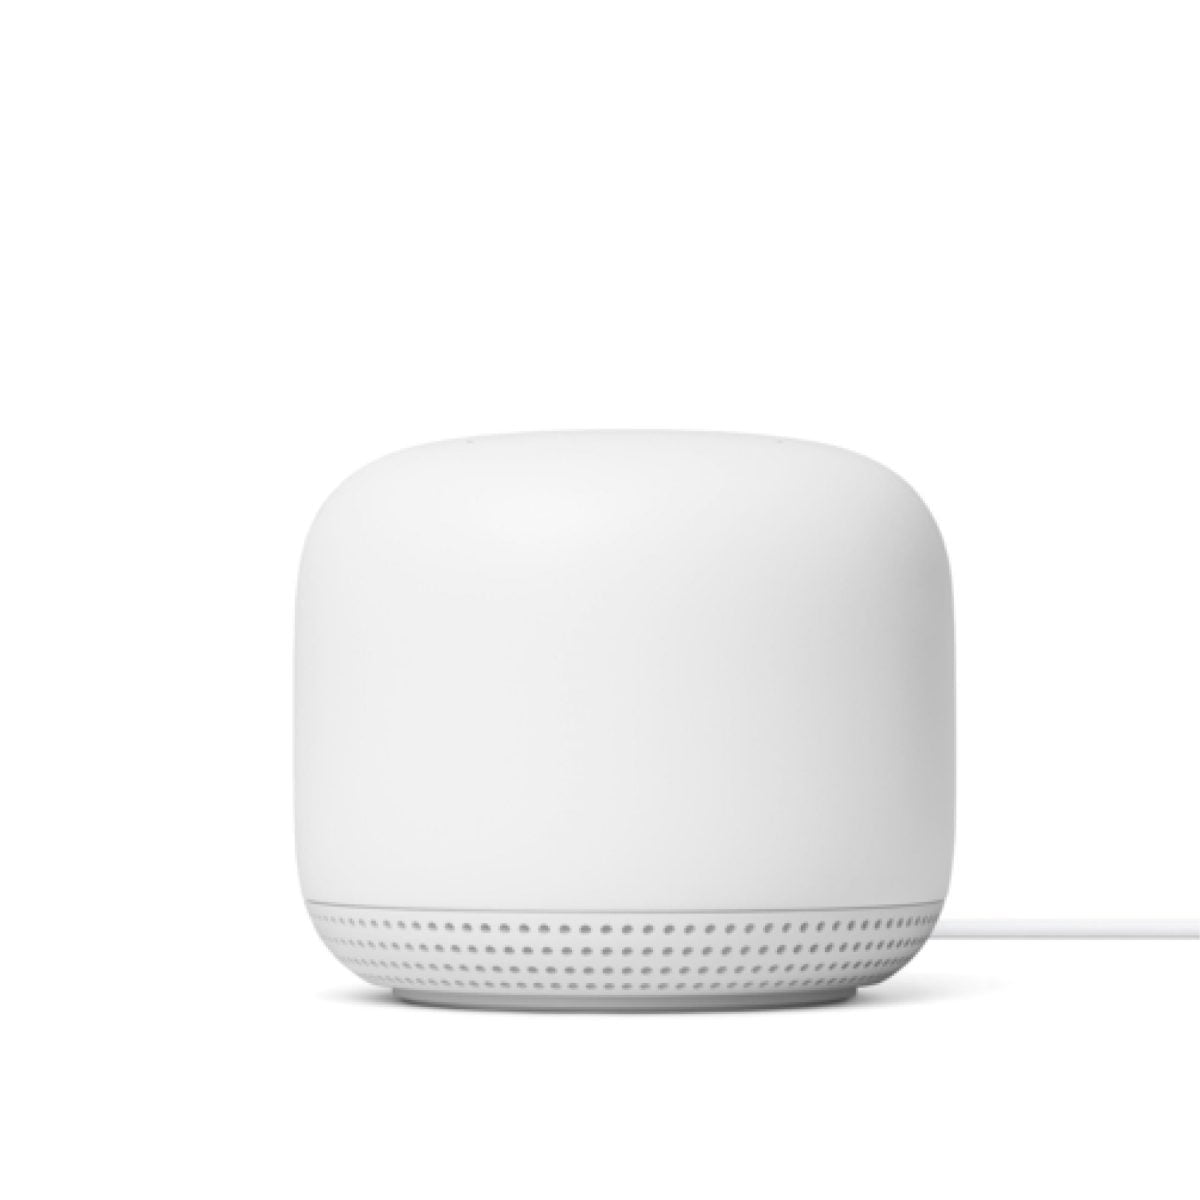 Dsd2212 02 Scaled Google Https://Youtu.be/Wsduj9Sm78K Google Nest Wifi Router And 2 Access Points (2020)